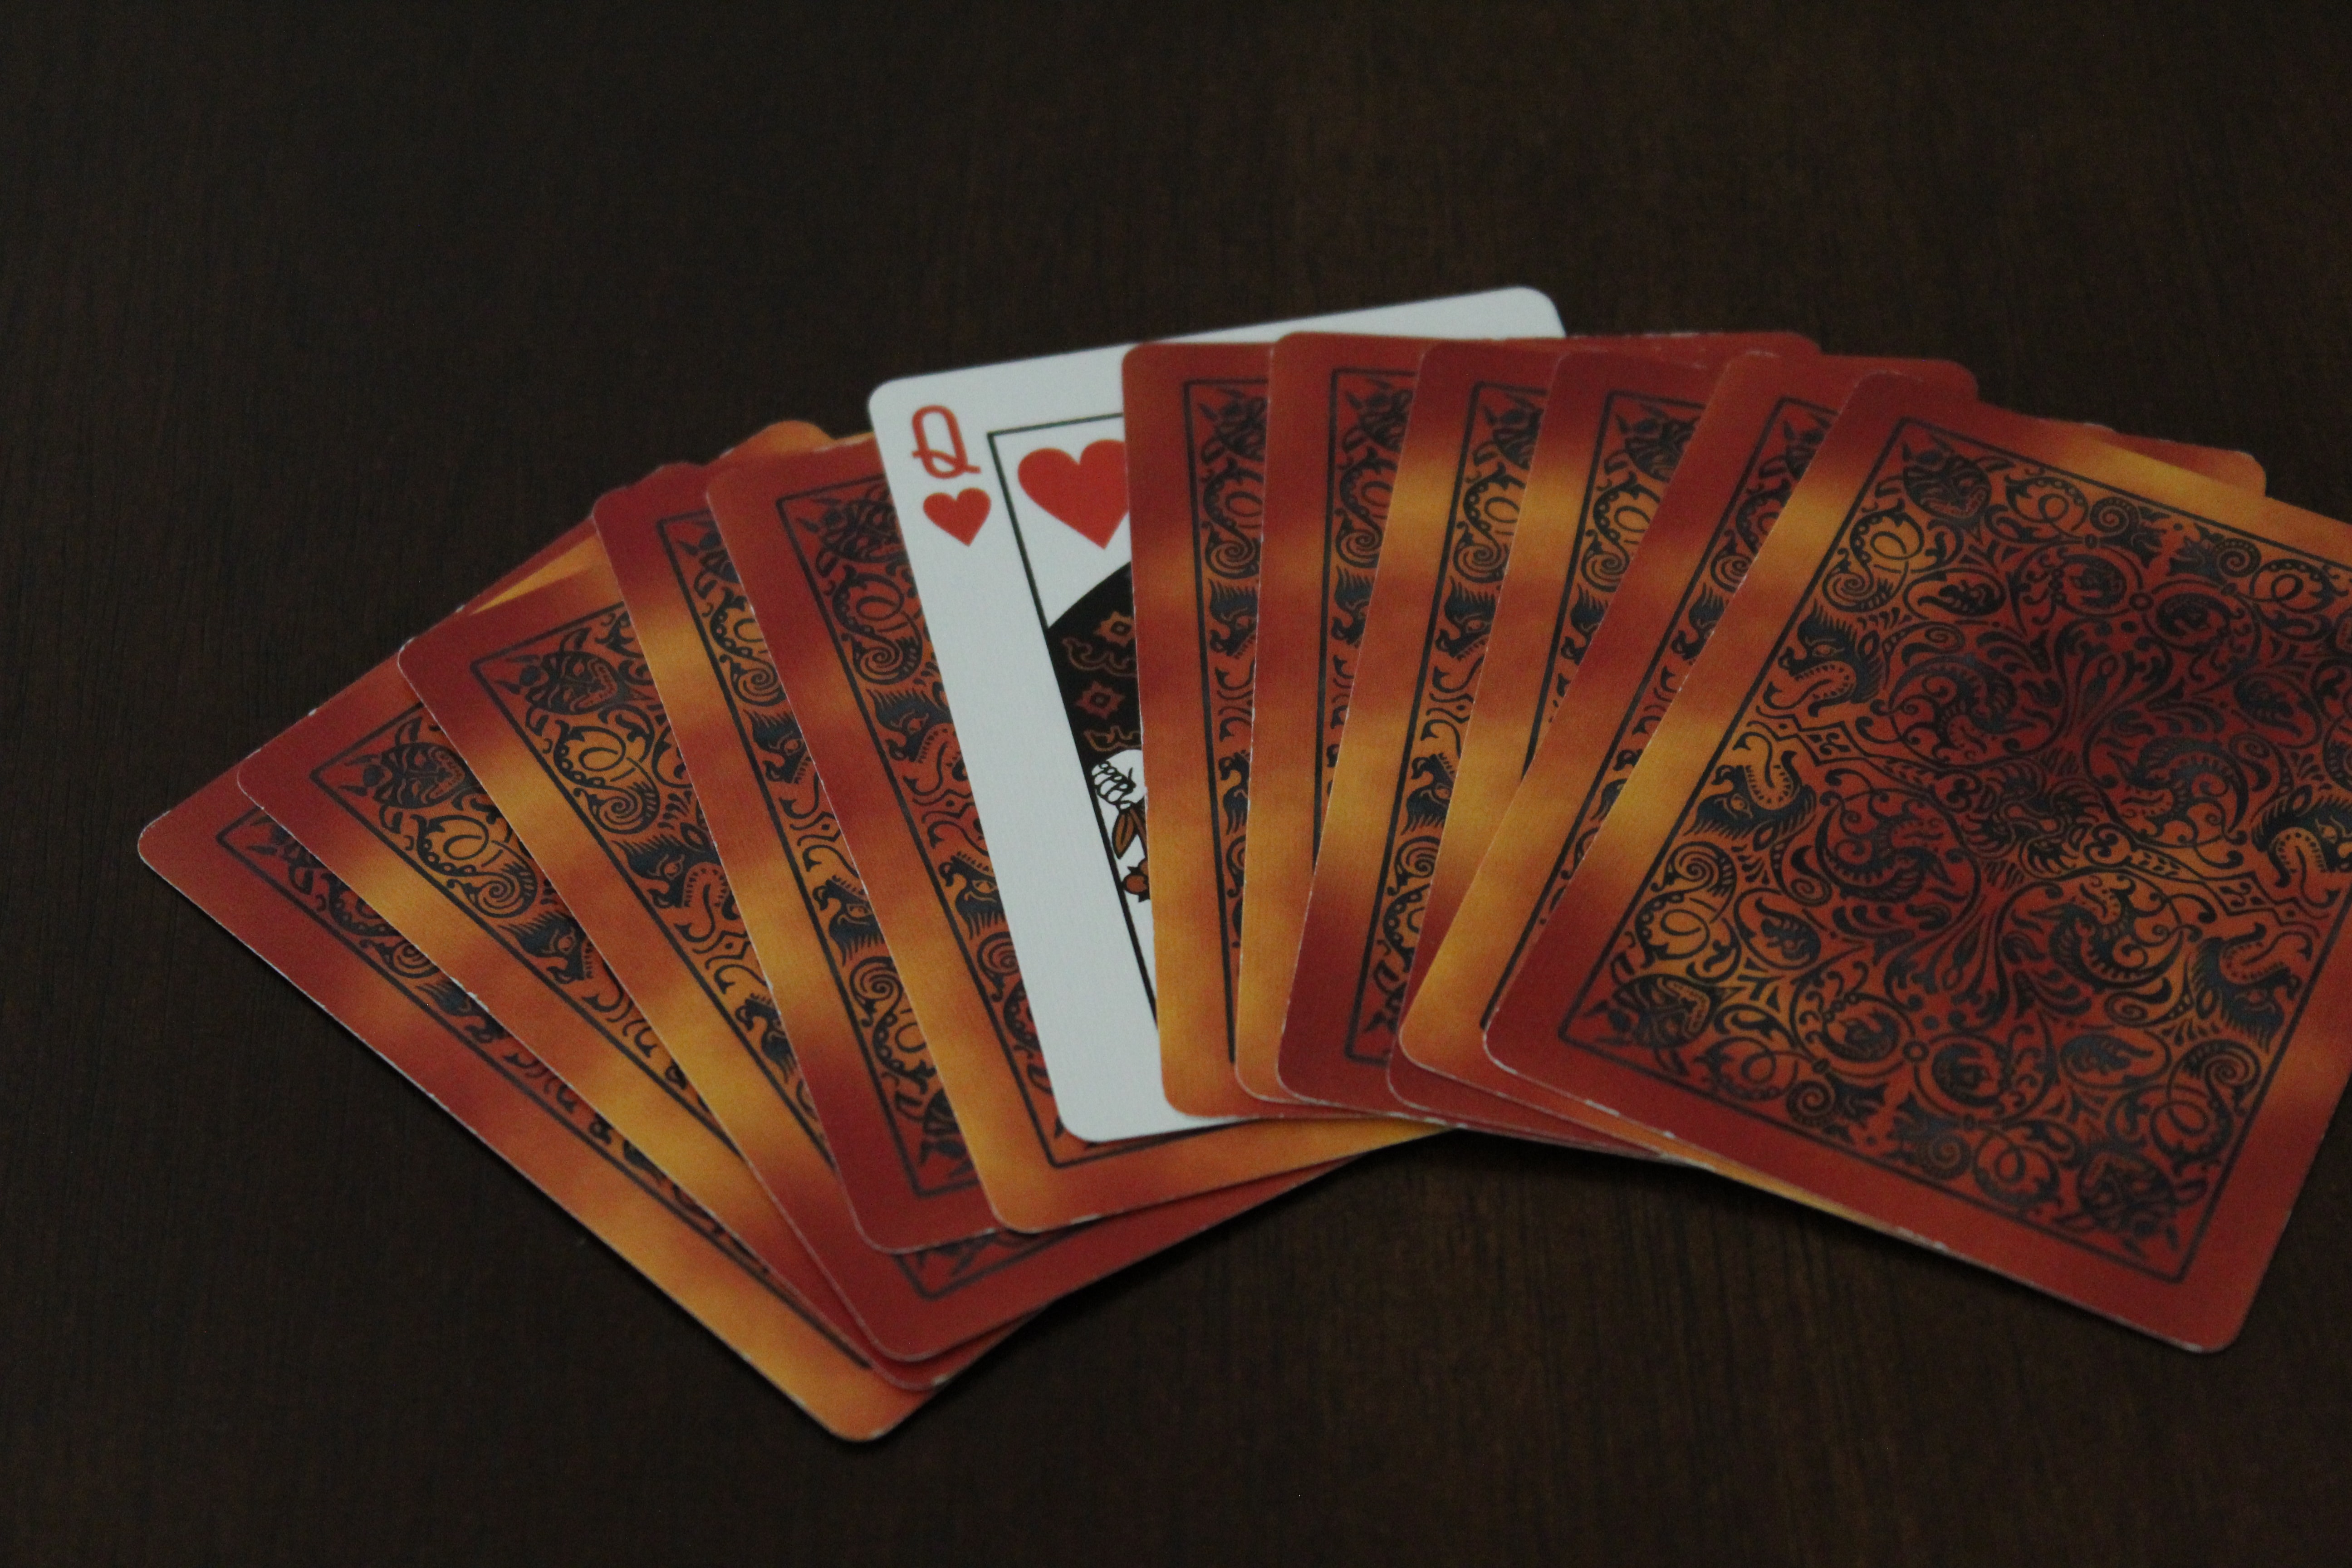 cards, miscellanea, miscellaneous, game, playing cards, queen iphone wallpaper